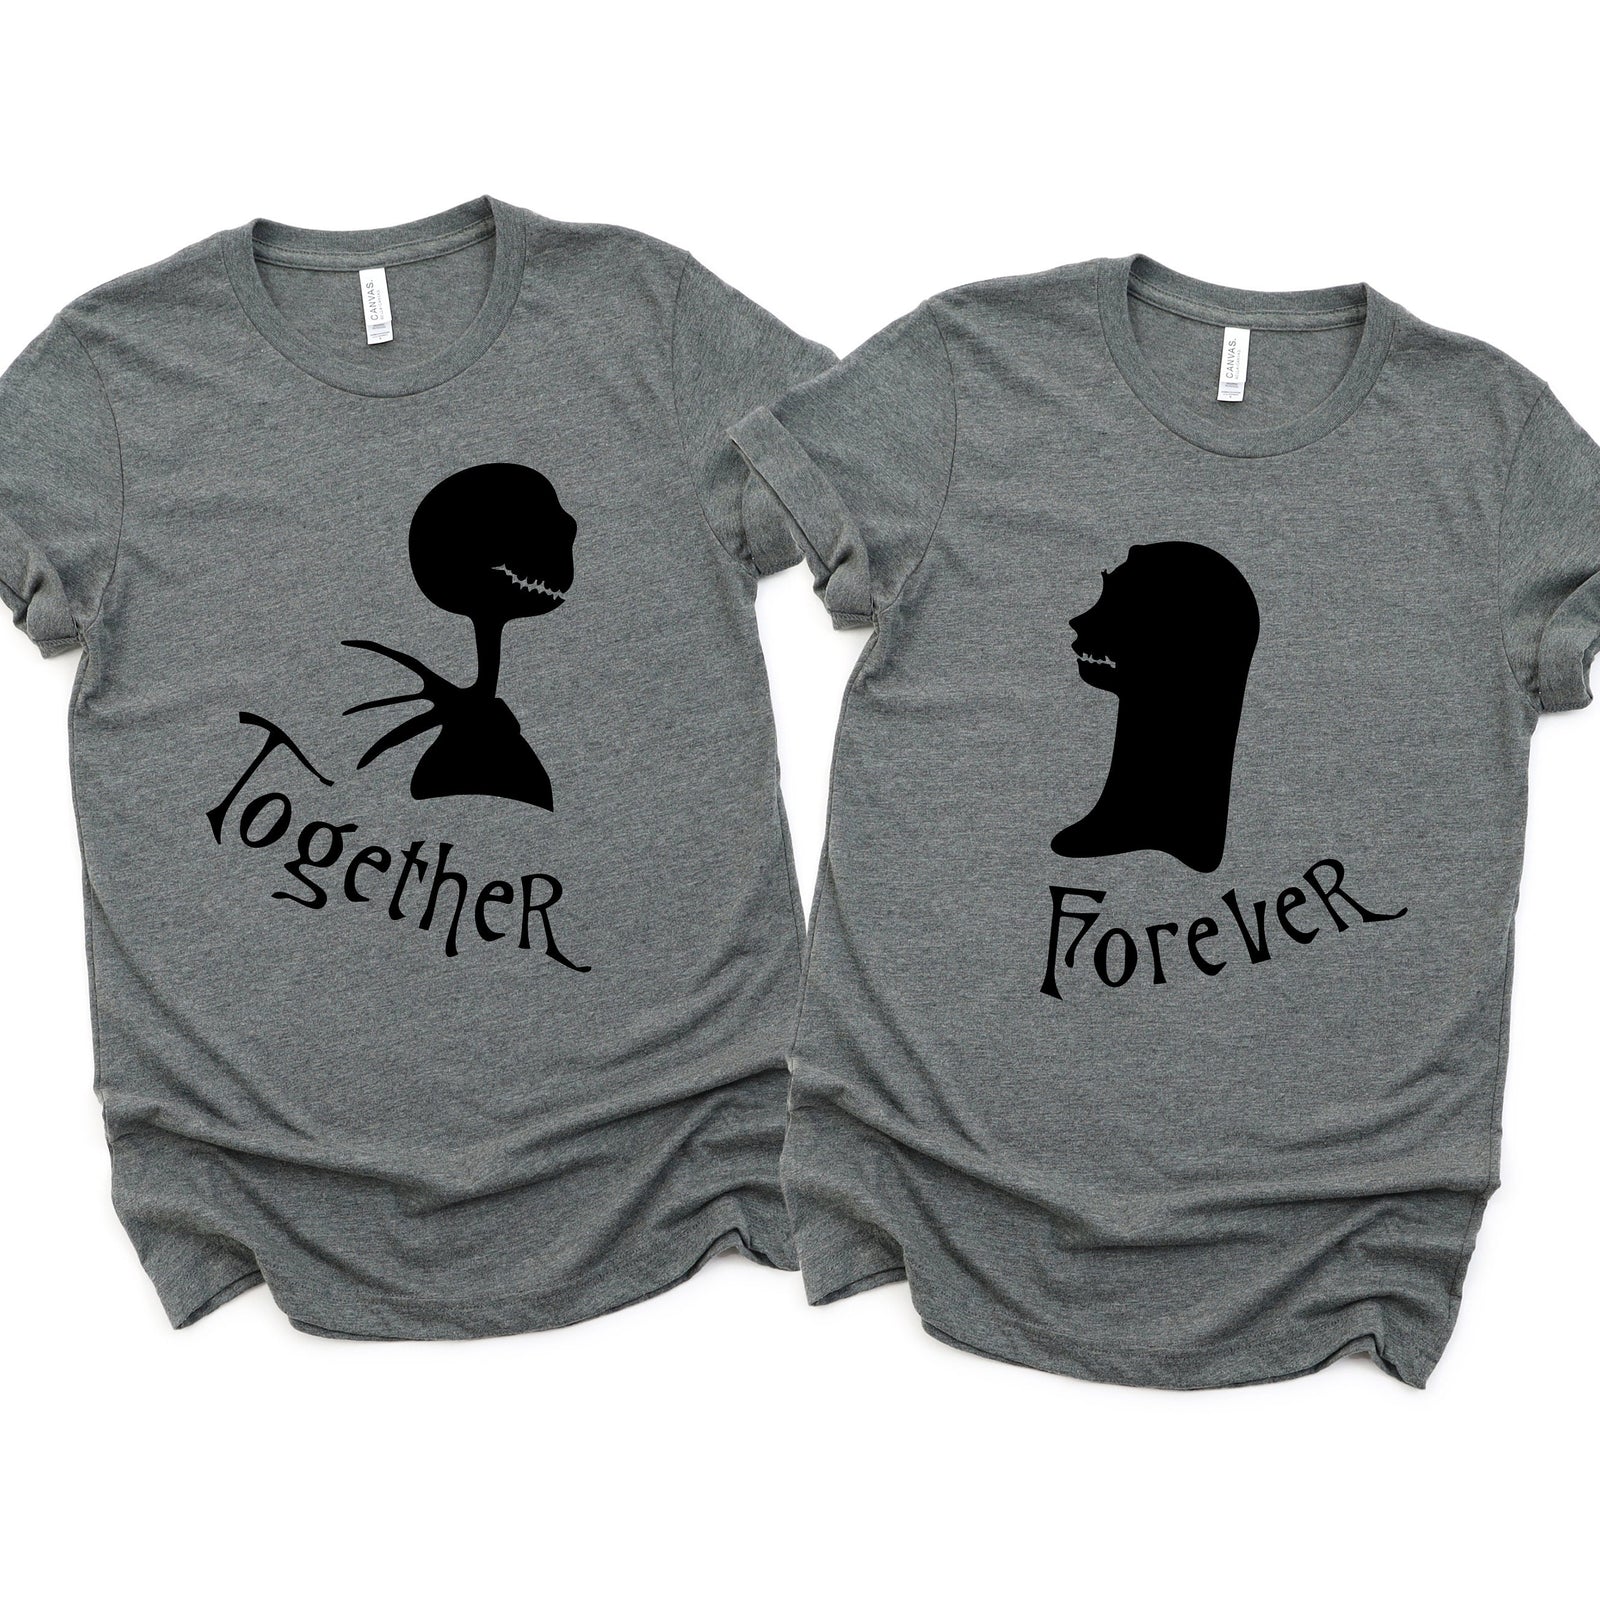 Nightmare Before Christmas Jack and Sally Shirts - Together Forever Disney Couples - Matching Shirts